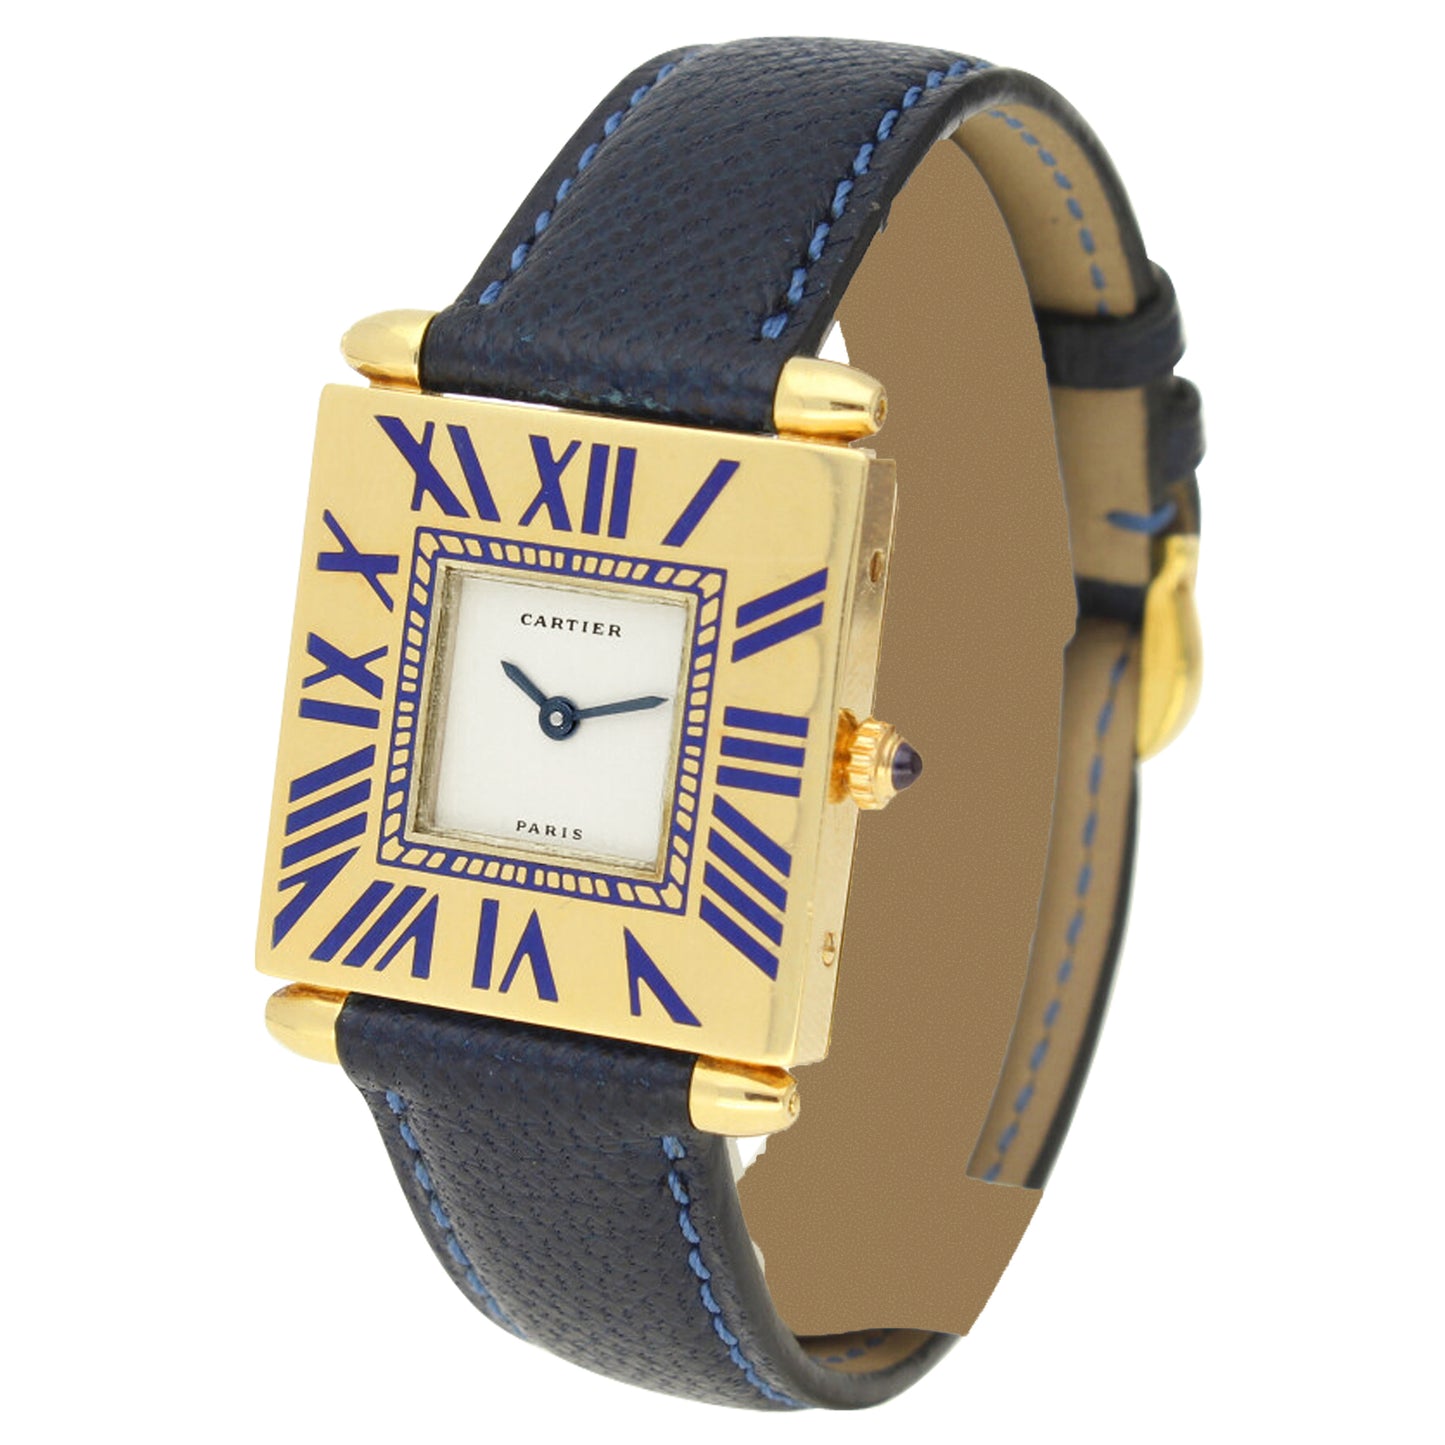 18ct yellow gold Cartier'Quadrant' wristwatch. Made 1970's